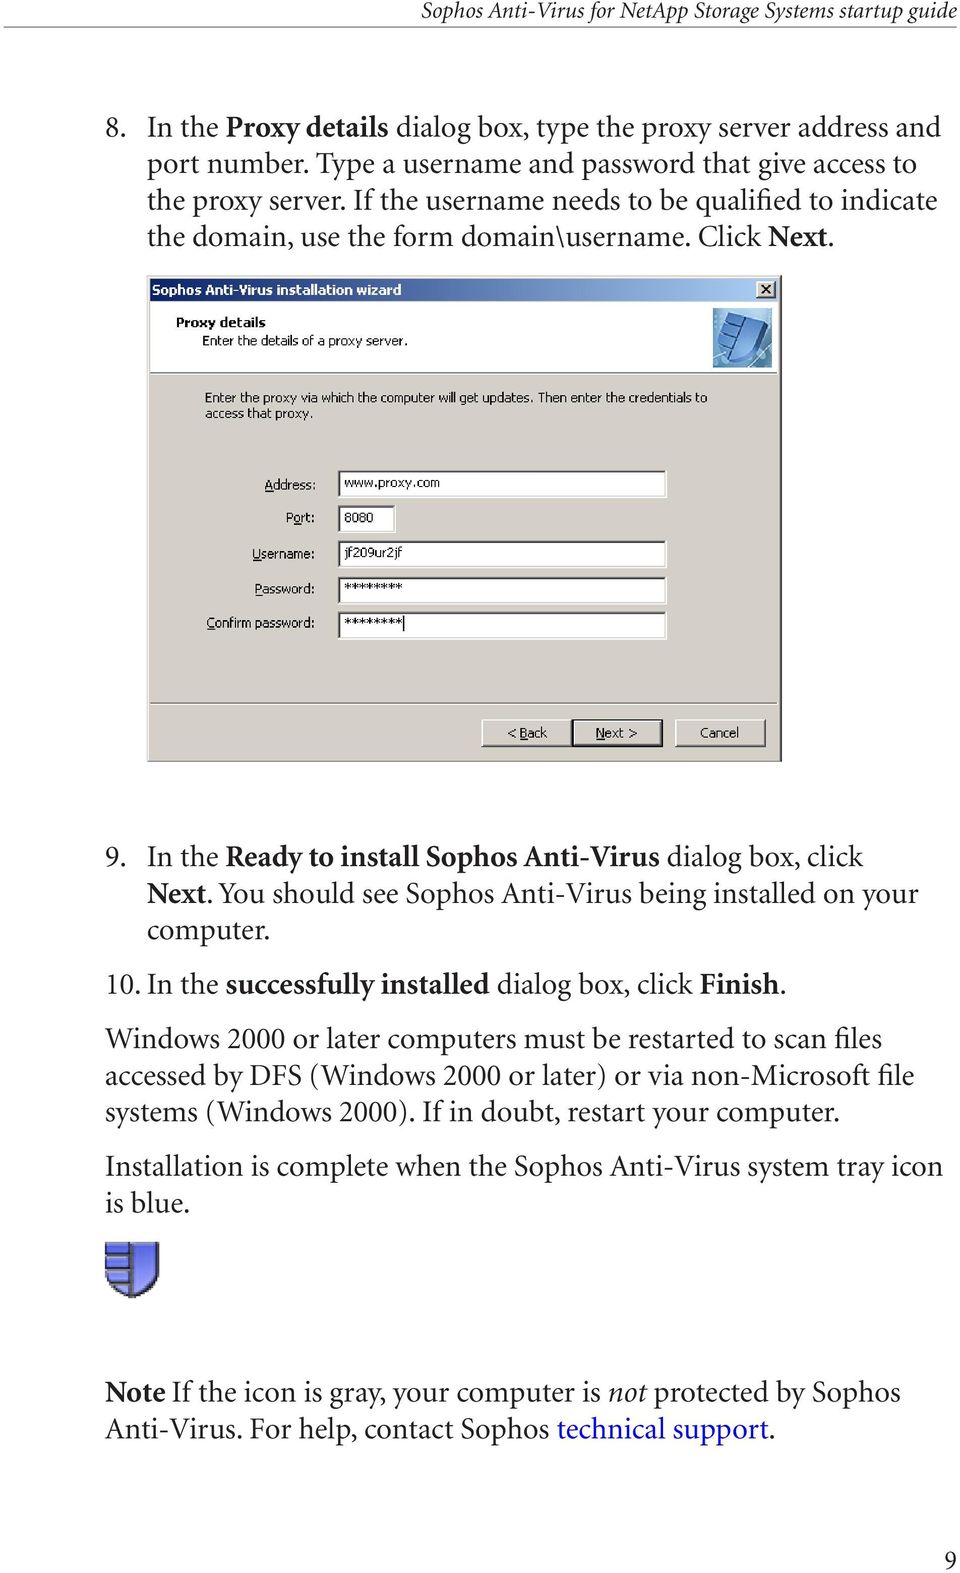 You should see Sophos Anti-Virus being installed on your computer. 10. In the successfully installed dialog box, click Finish.